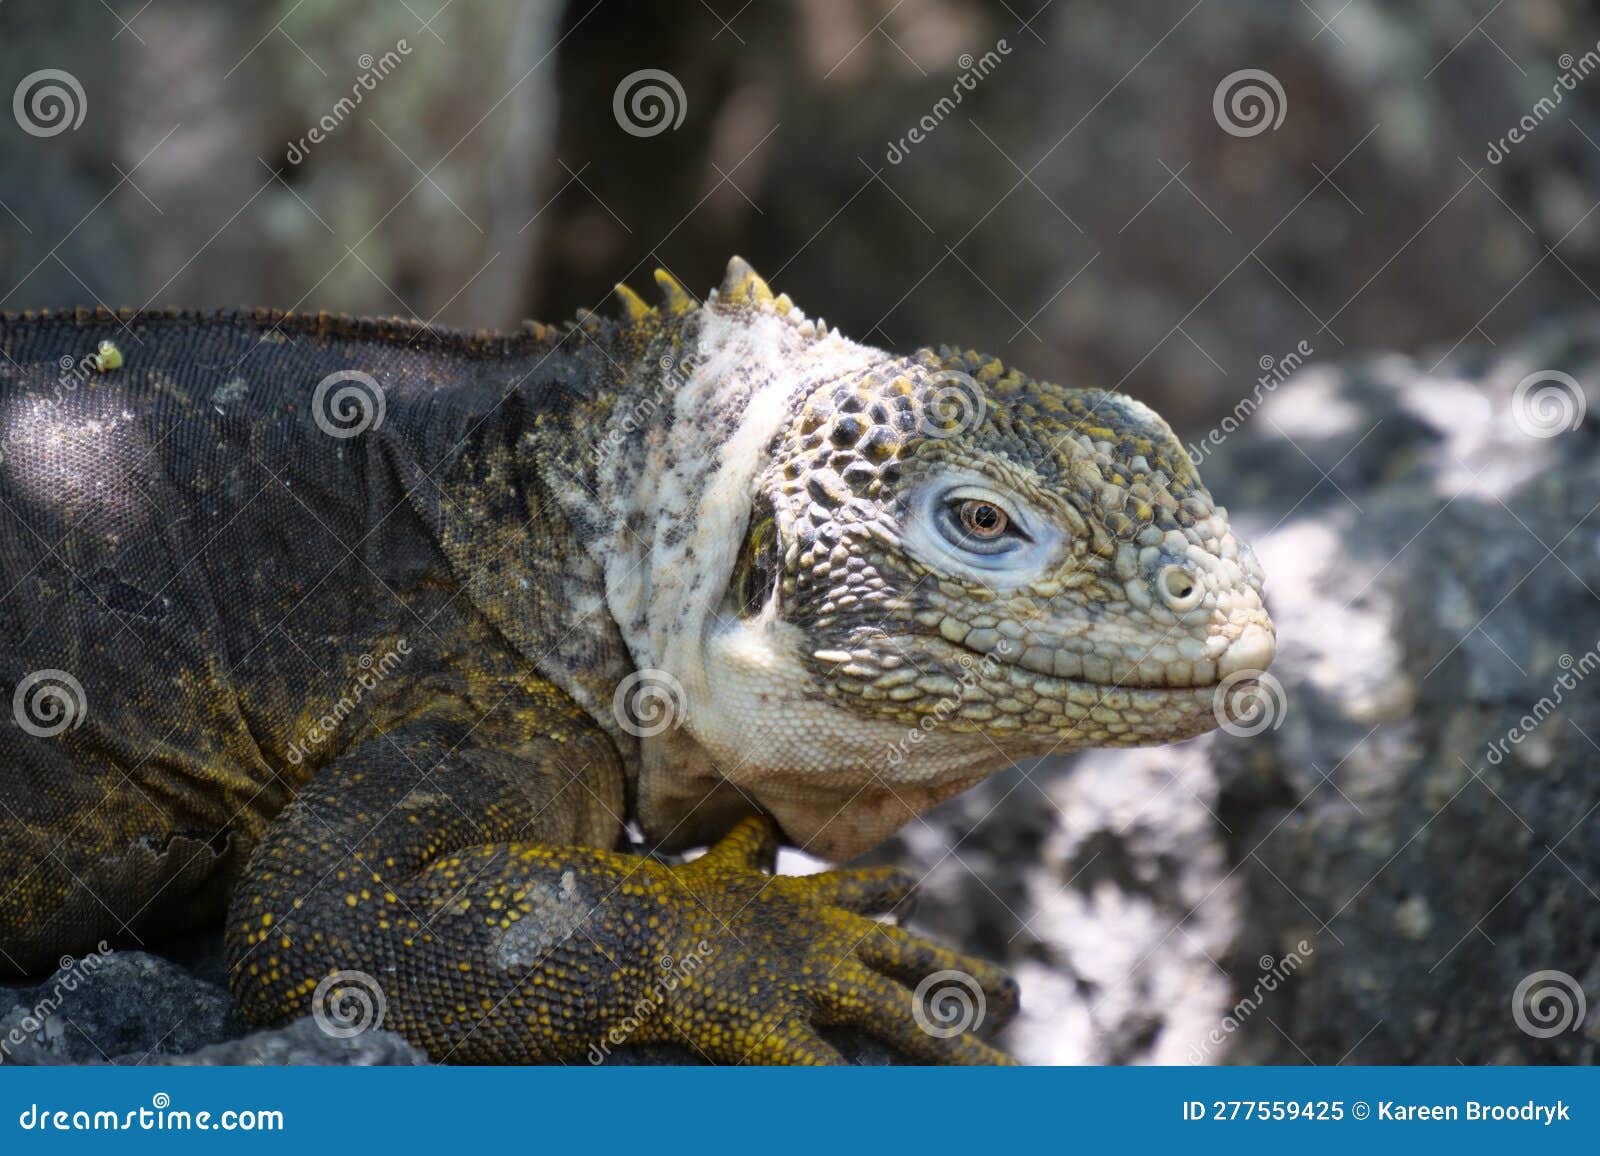 close up of the side profile of a bright yellow adult land iguana, iguana terrestre between green cactus plants at south plaza